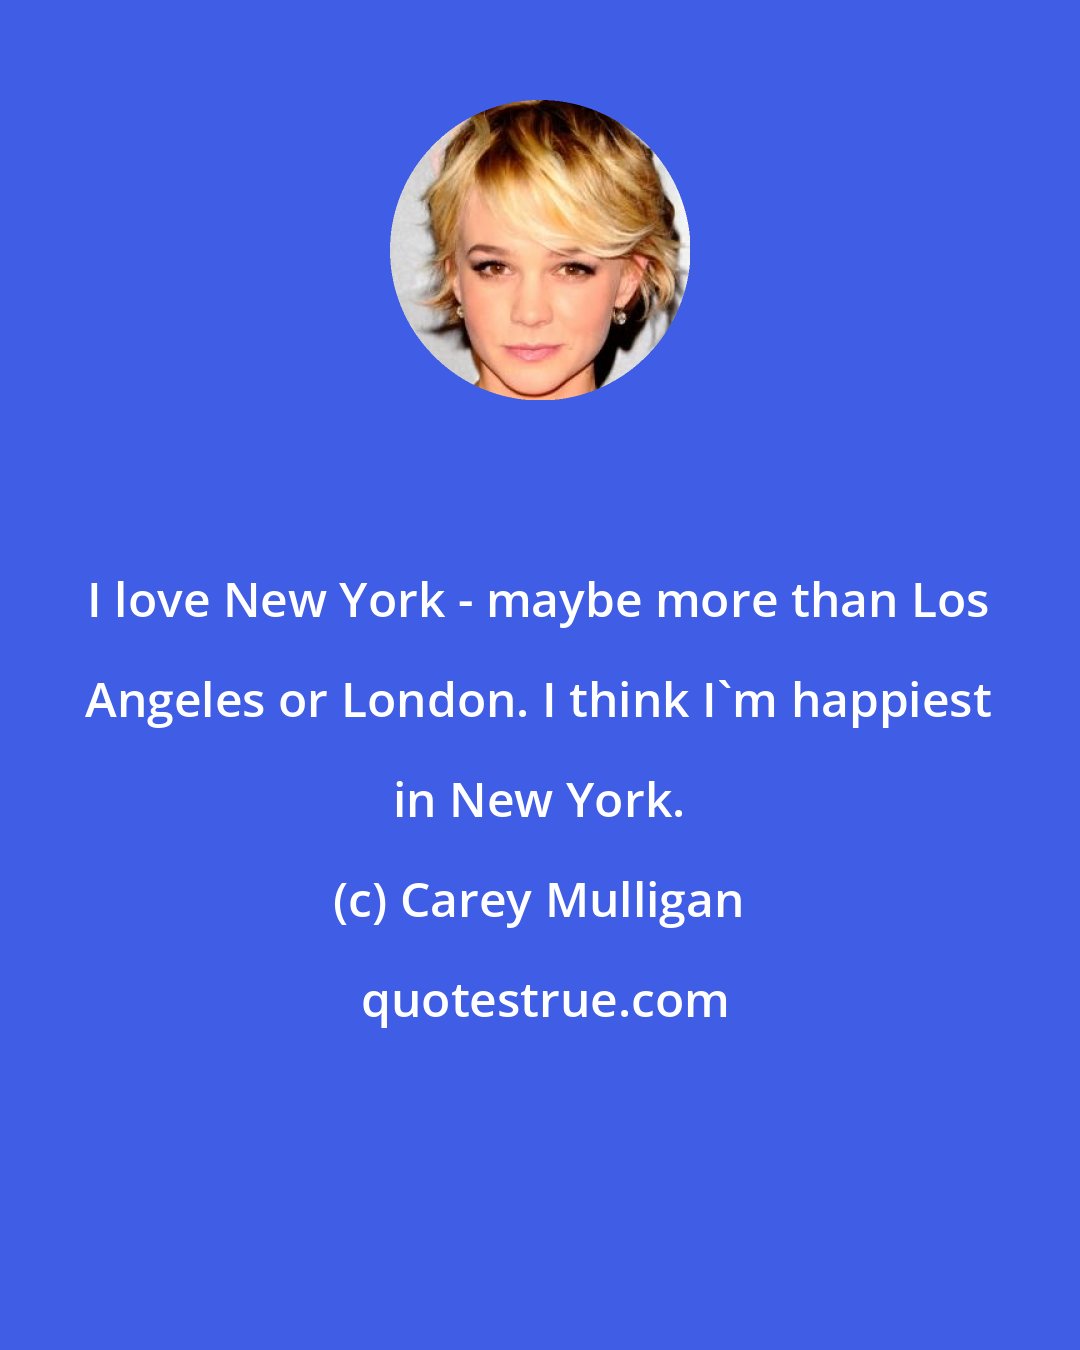 Carey Mulligan: I love New York - maybe more than Los Angeles or London. I think I'm happiest in New York.